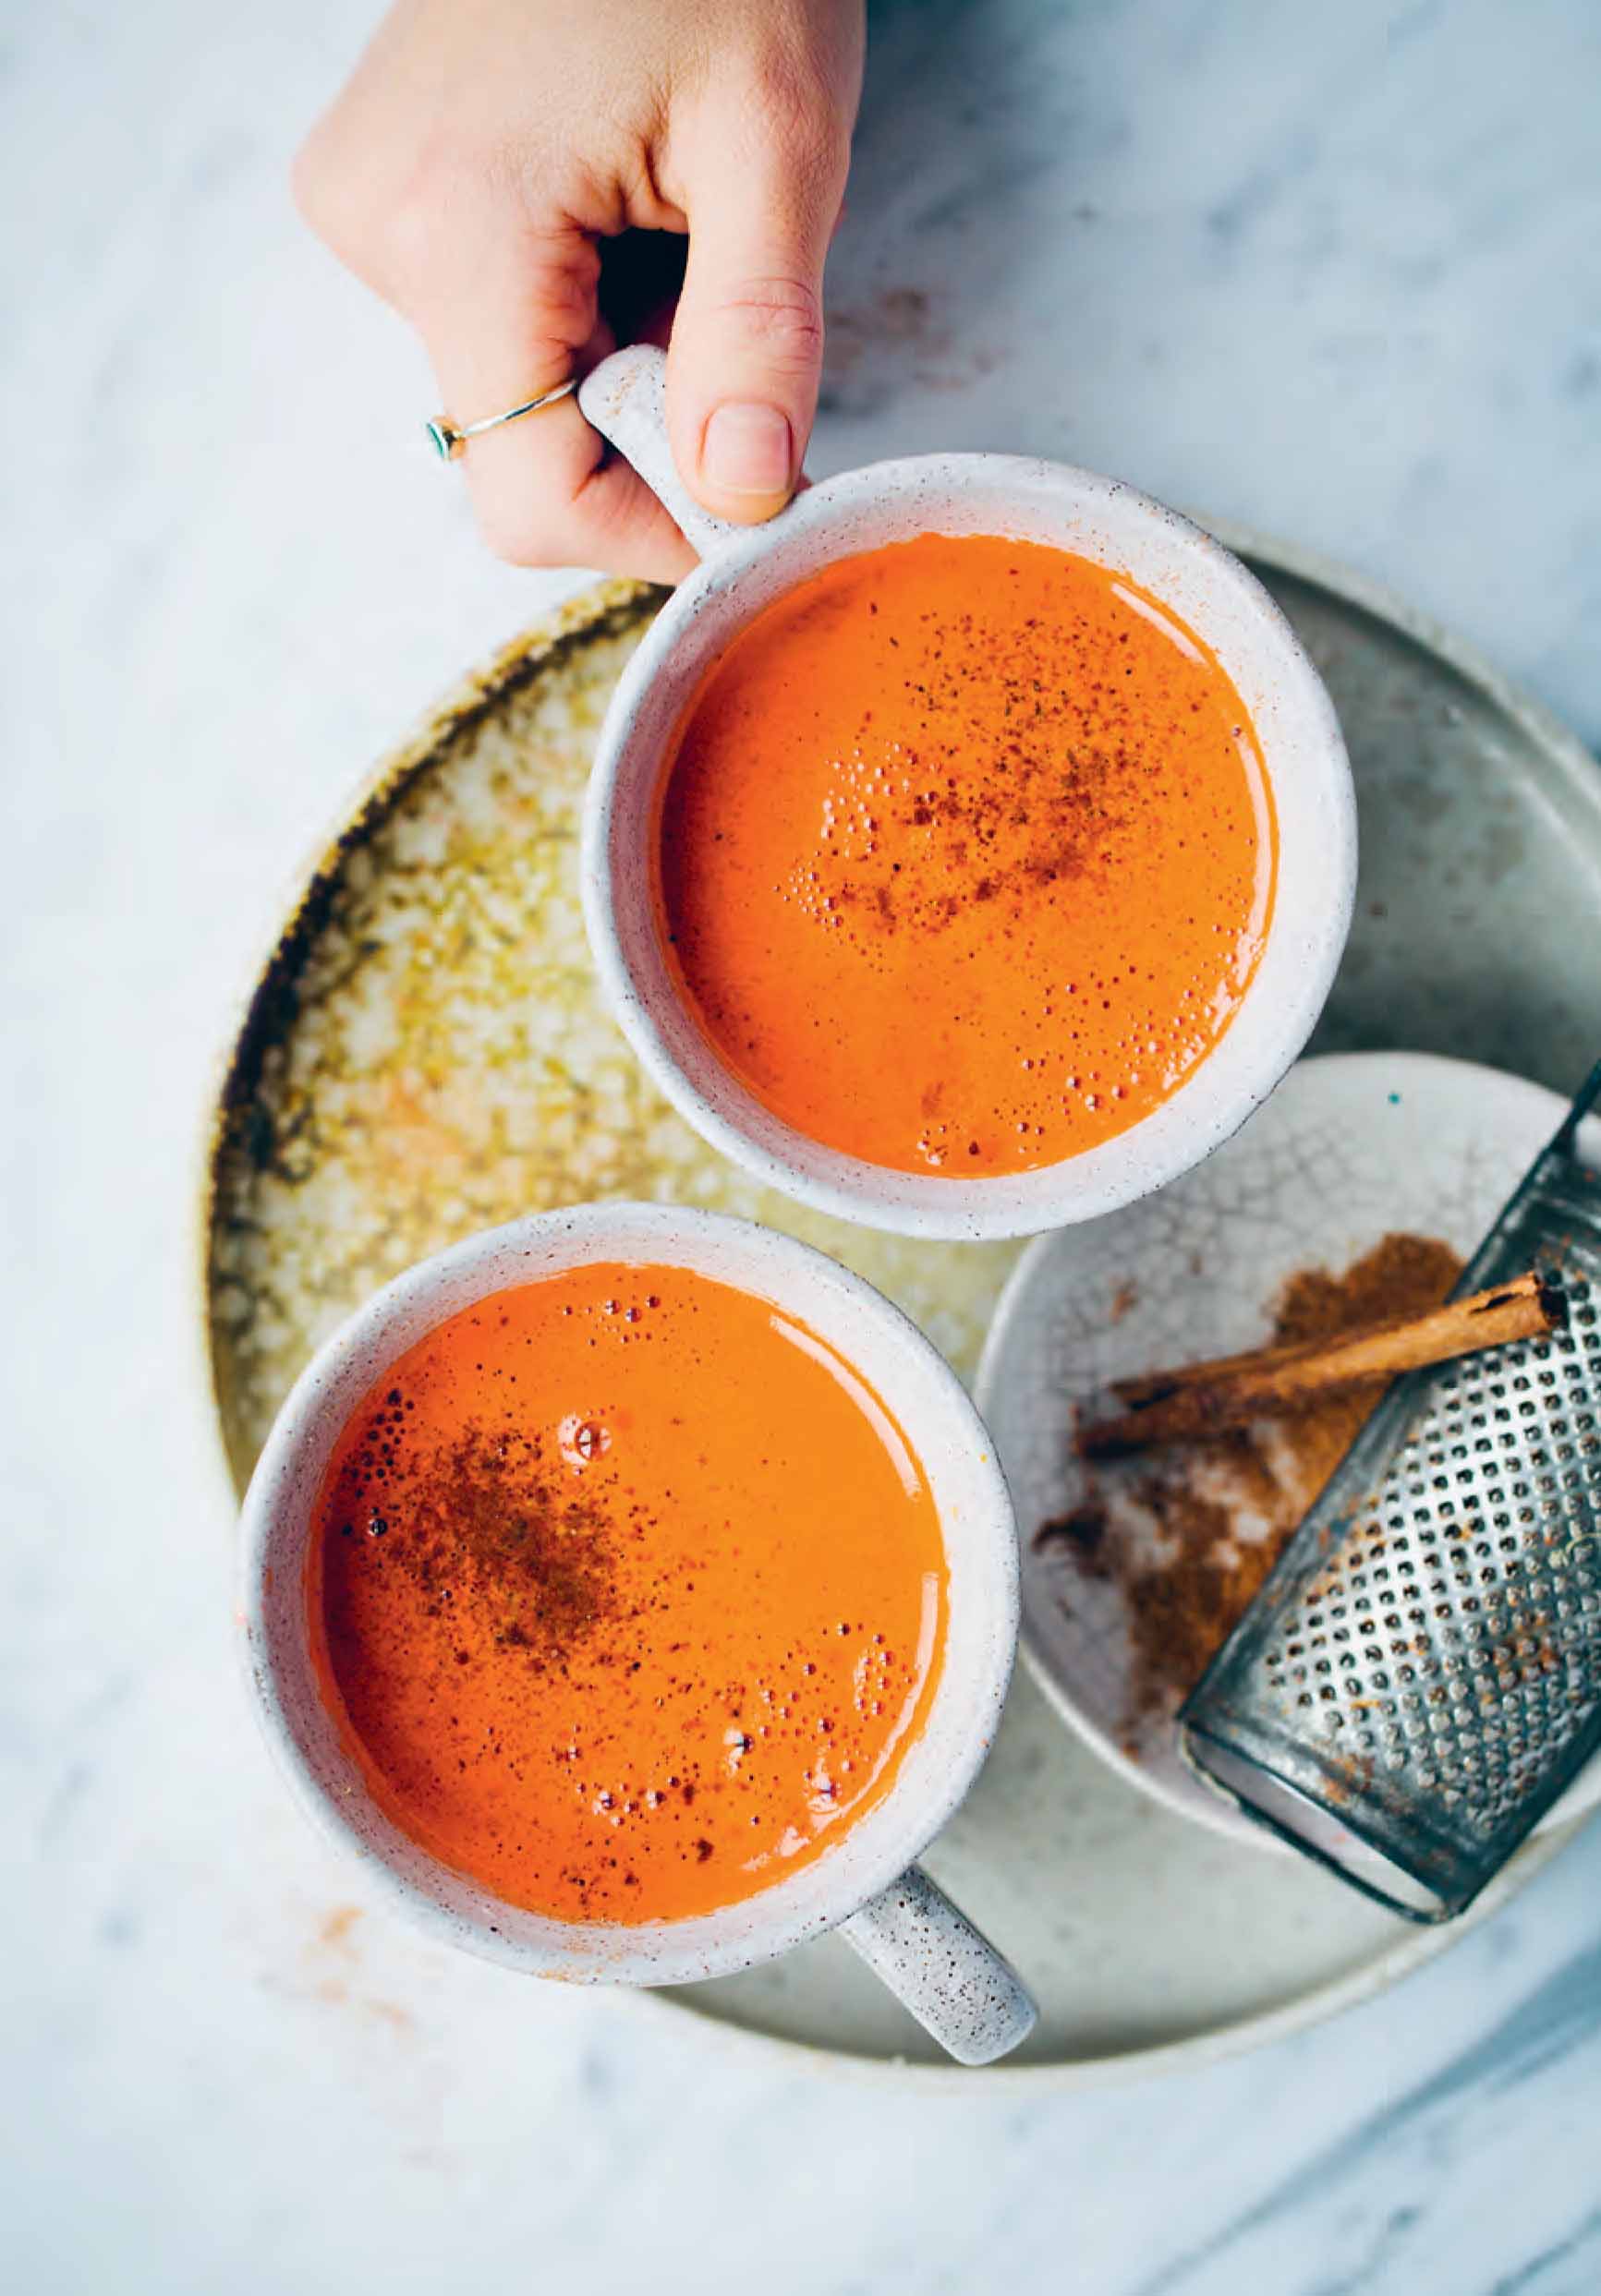 Spicy apple & carrot ‘hot toddy’